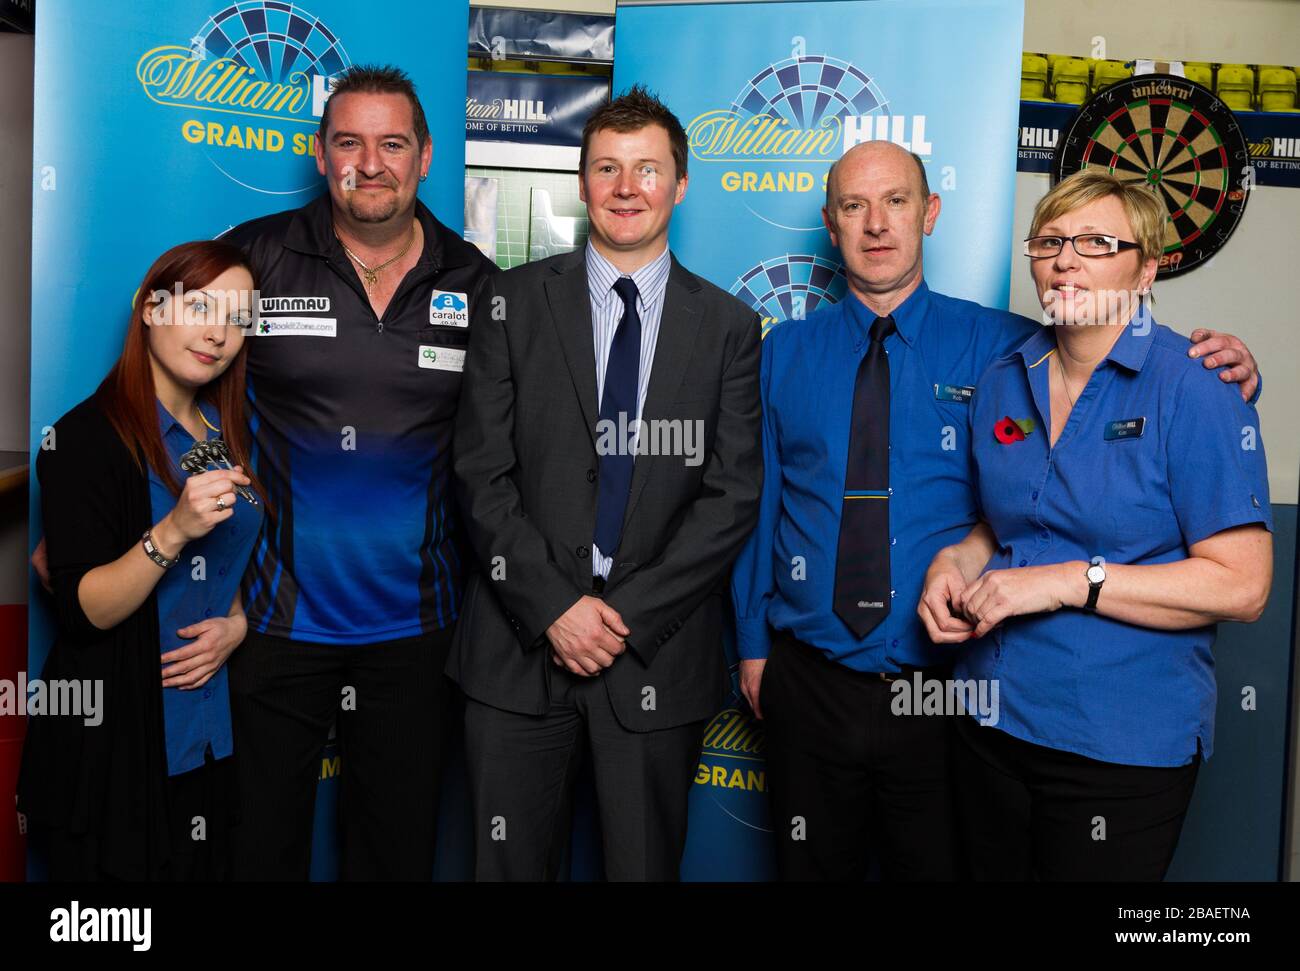 Staff from the William Hill store pose with Dean Winstanley Jo, Dean Winstanley, District Manager Pete Bowskill, Rob and  Kim at the William Hill shop in Wolverhampton Stock Photo